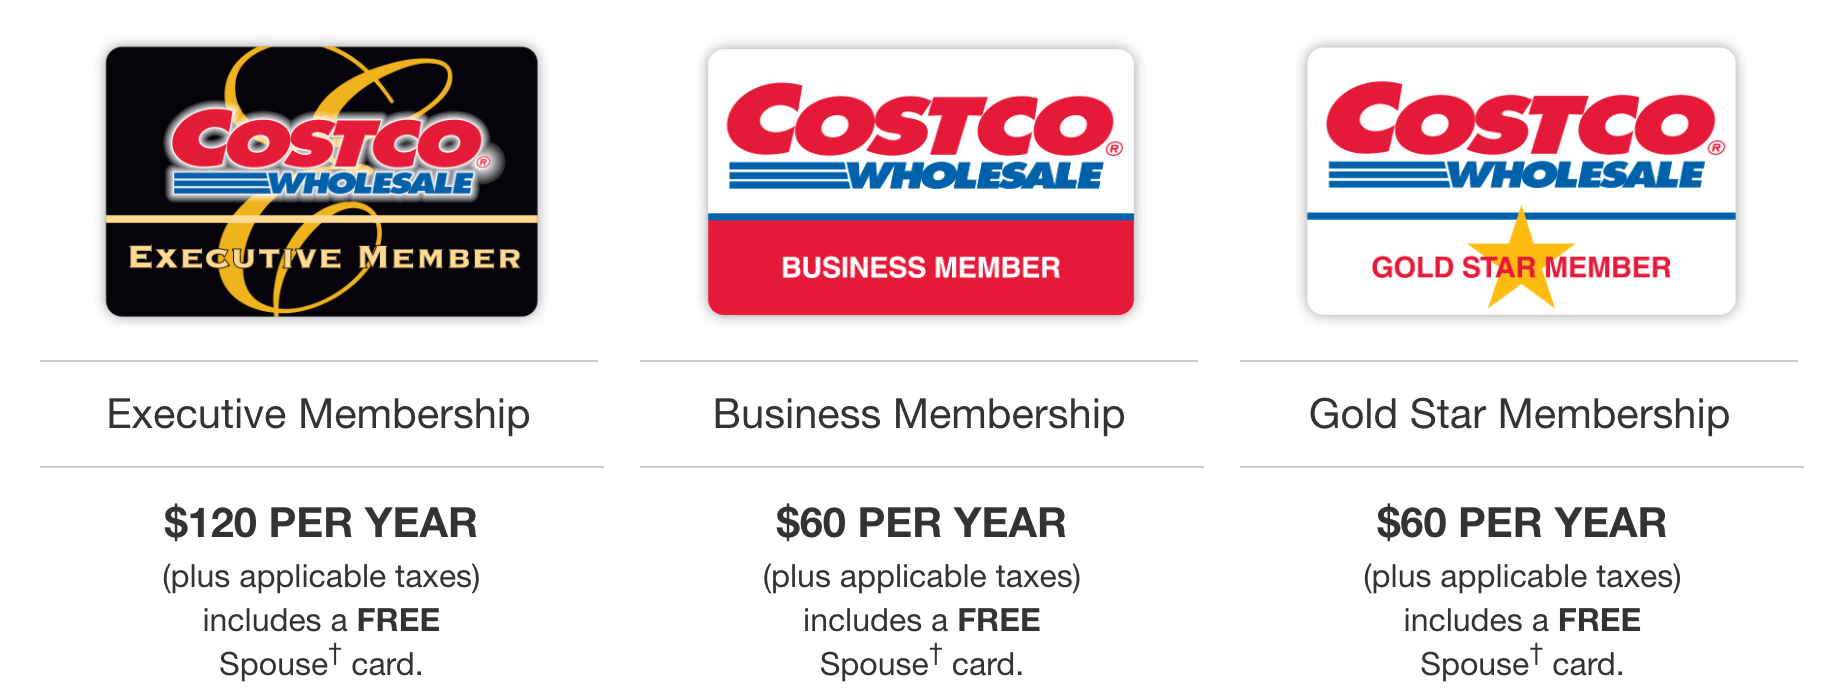 How To Get Costco Membership For Free